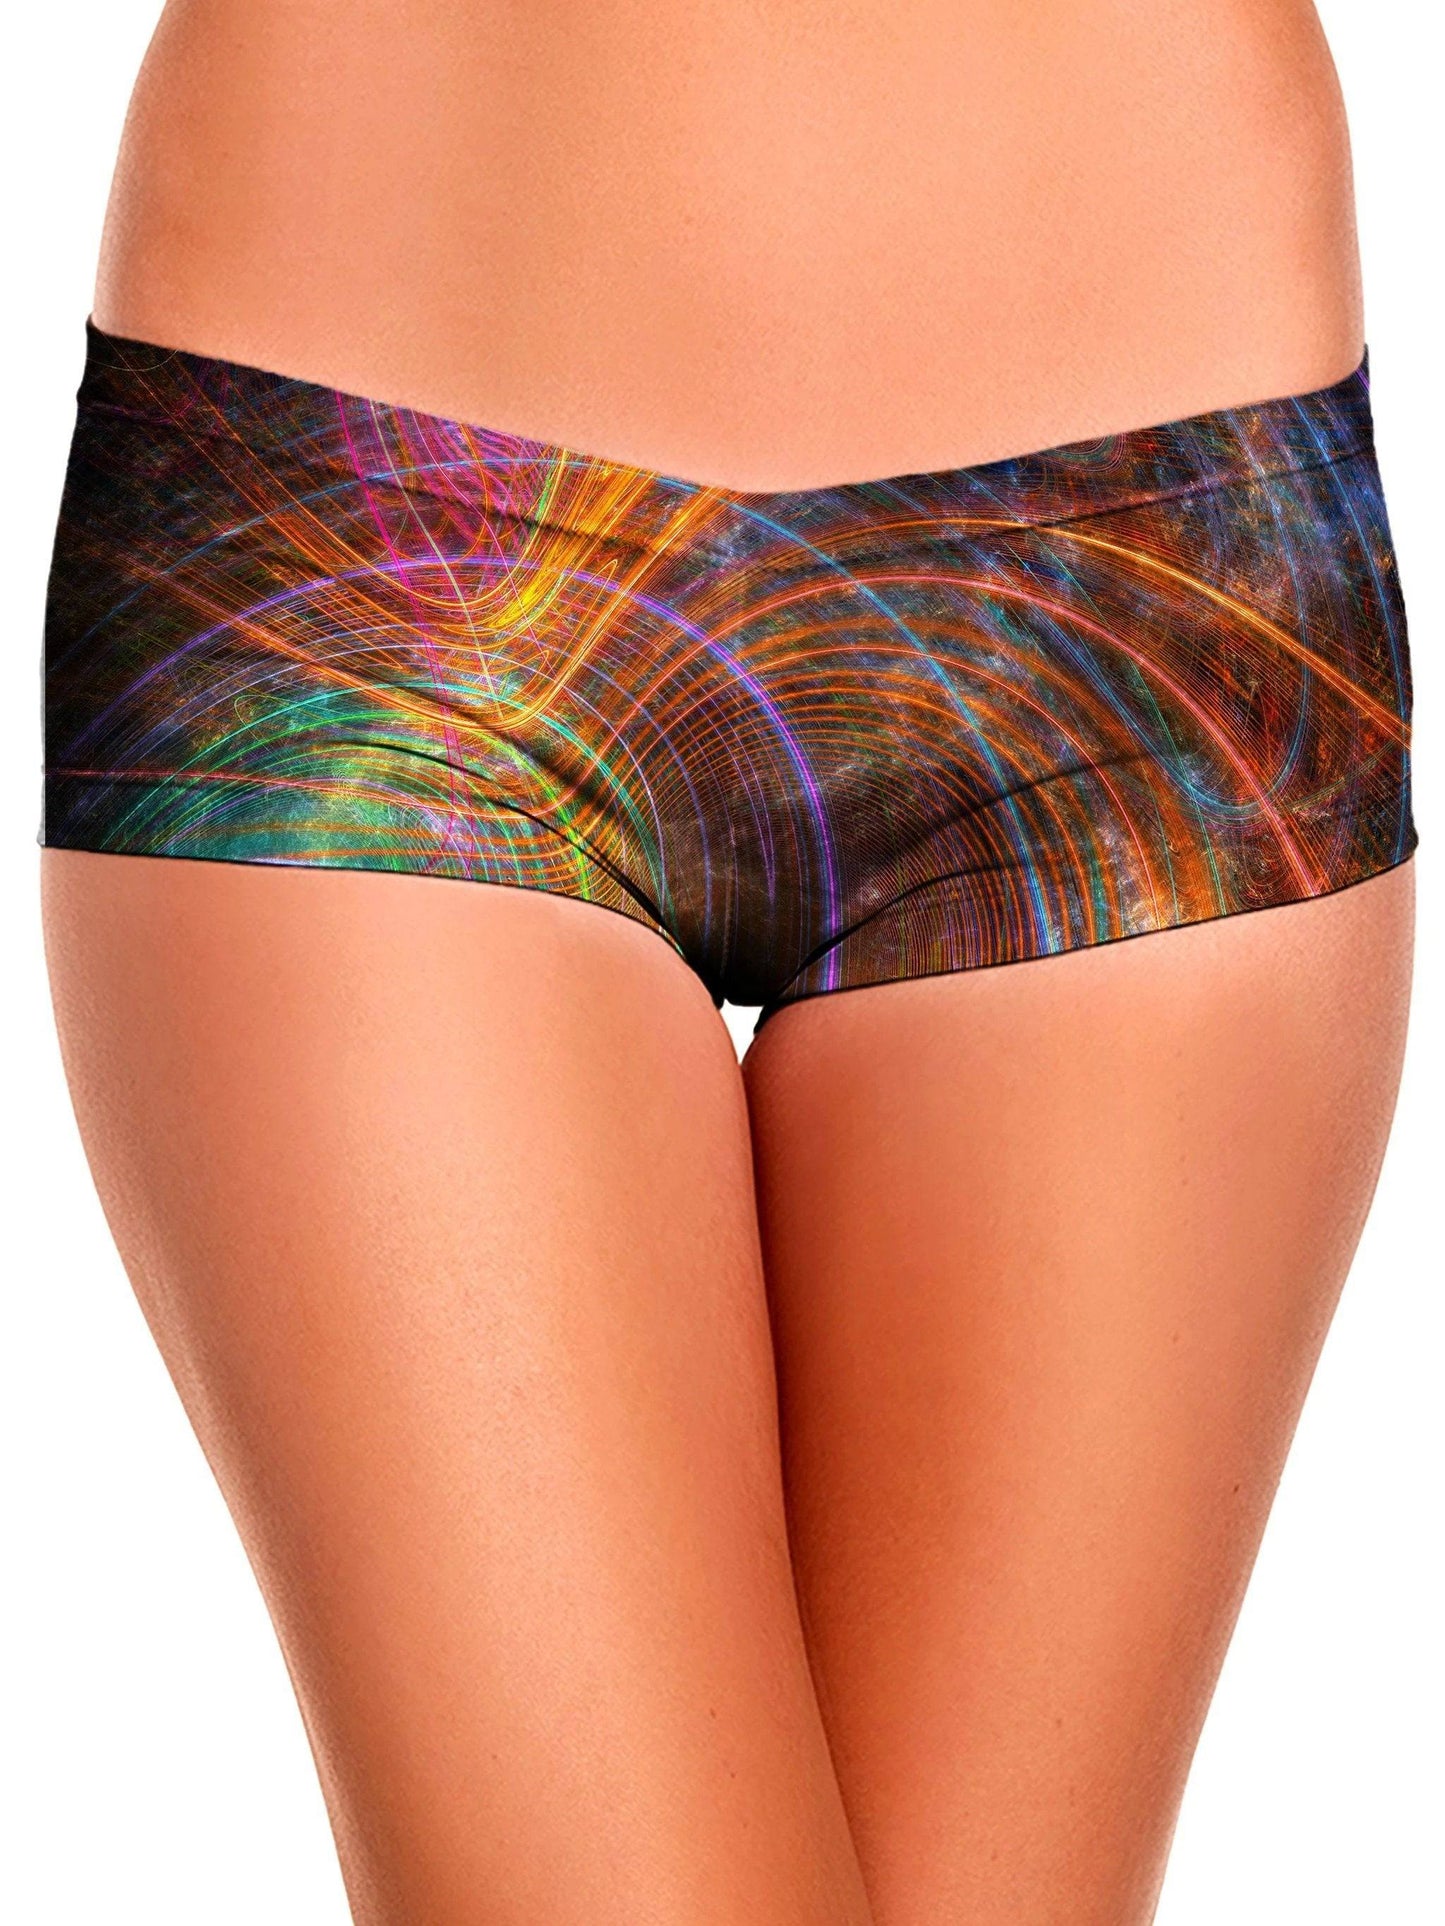 Fractalized Crop Top and Booty Shorts Combo, Yantrart Design, | iEDM